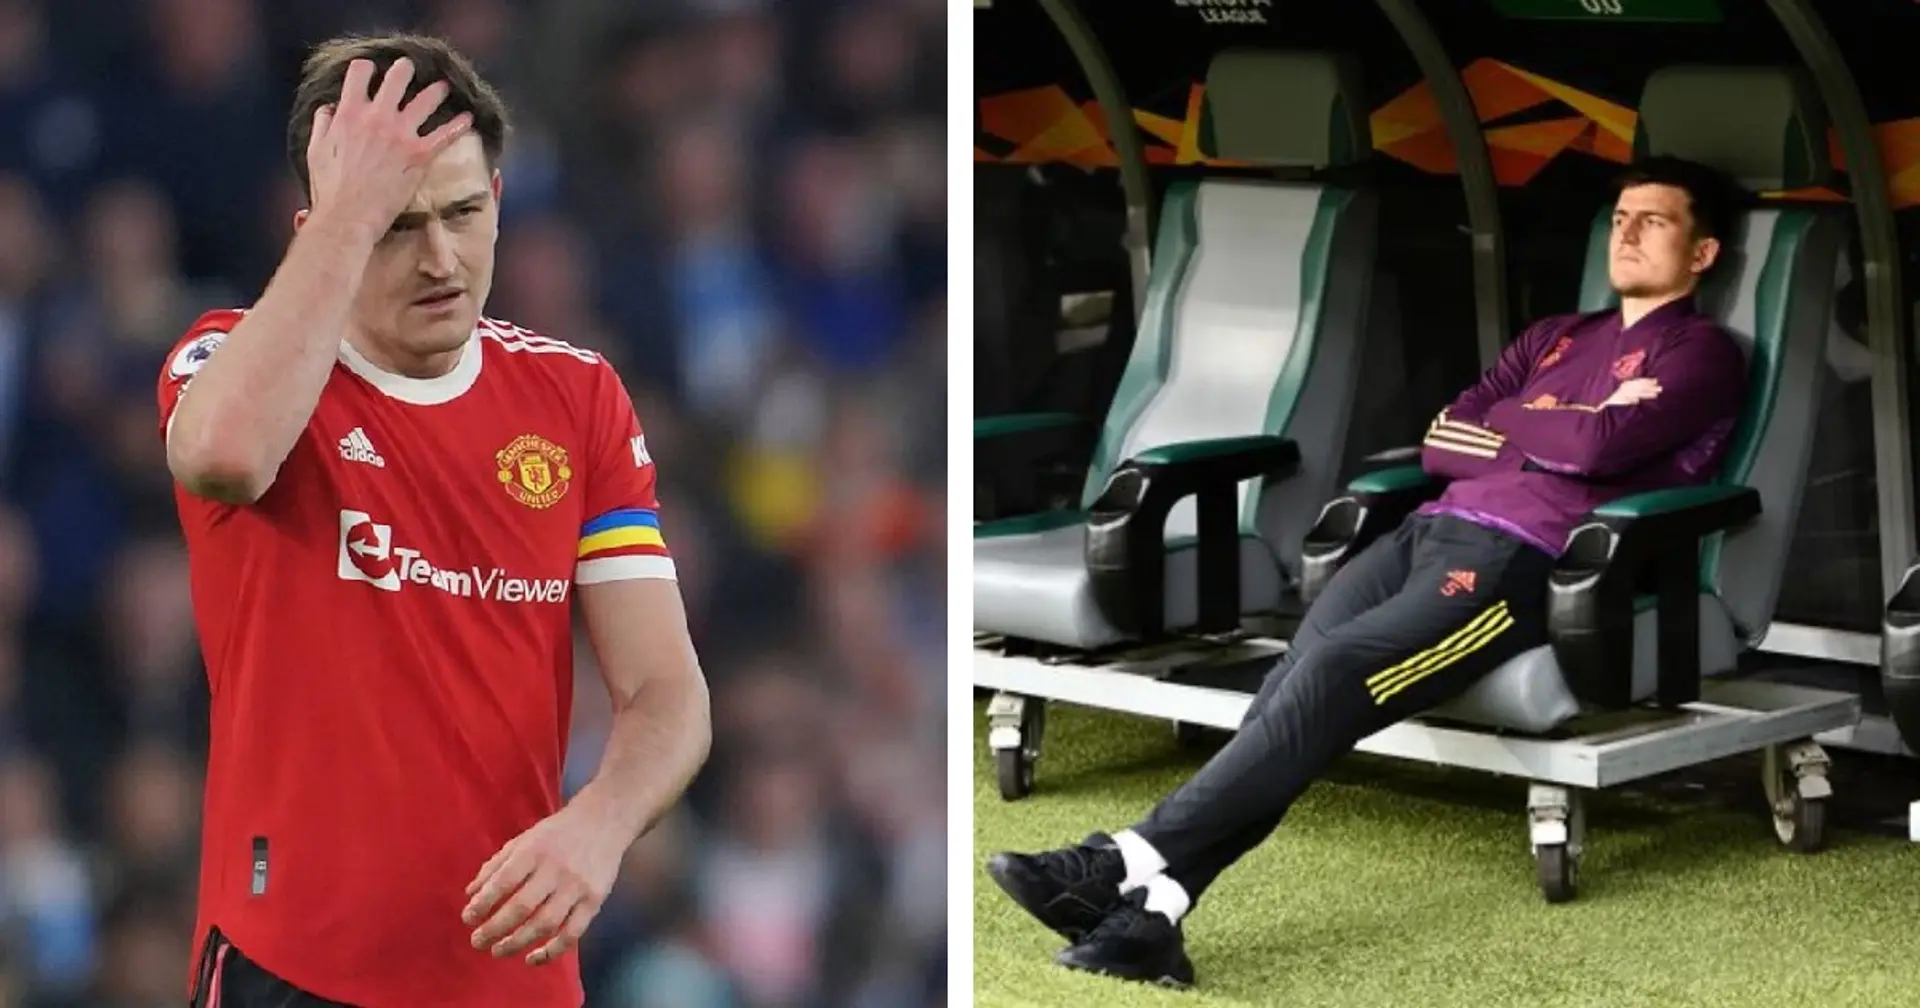 'Subs have scored some crucial goals': Maguire makes case for fringe players at Man United